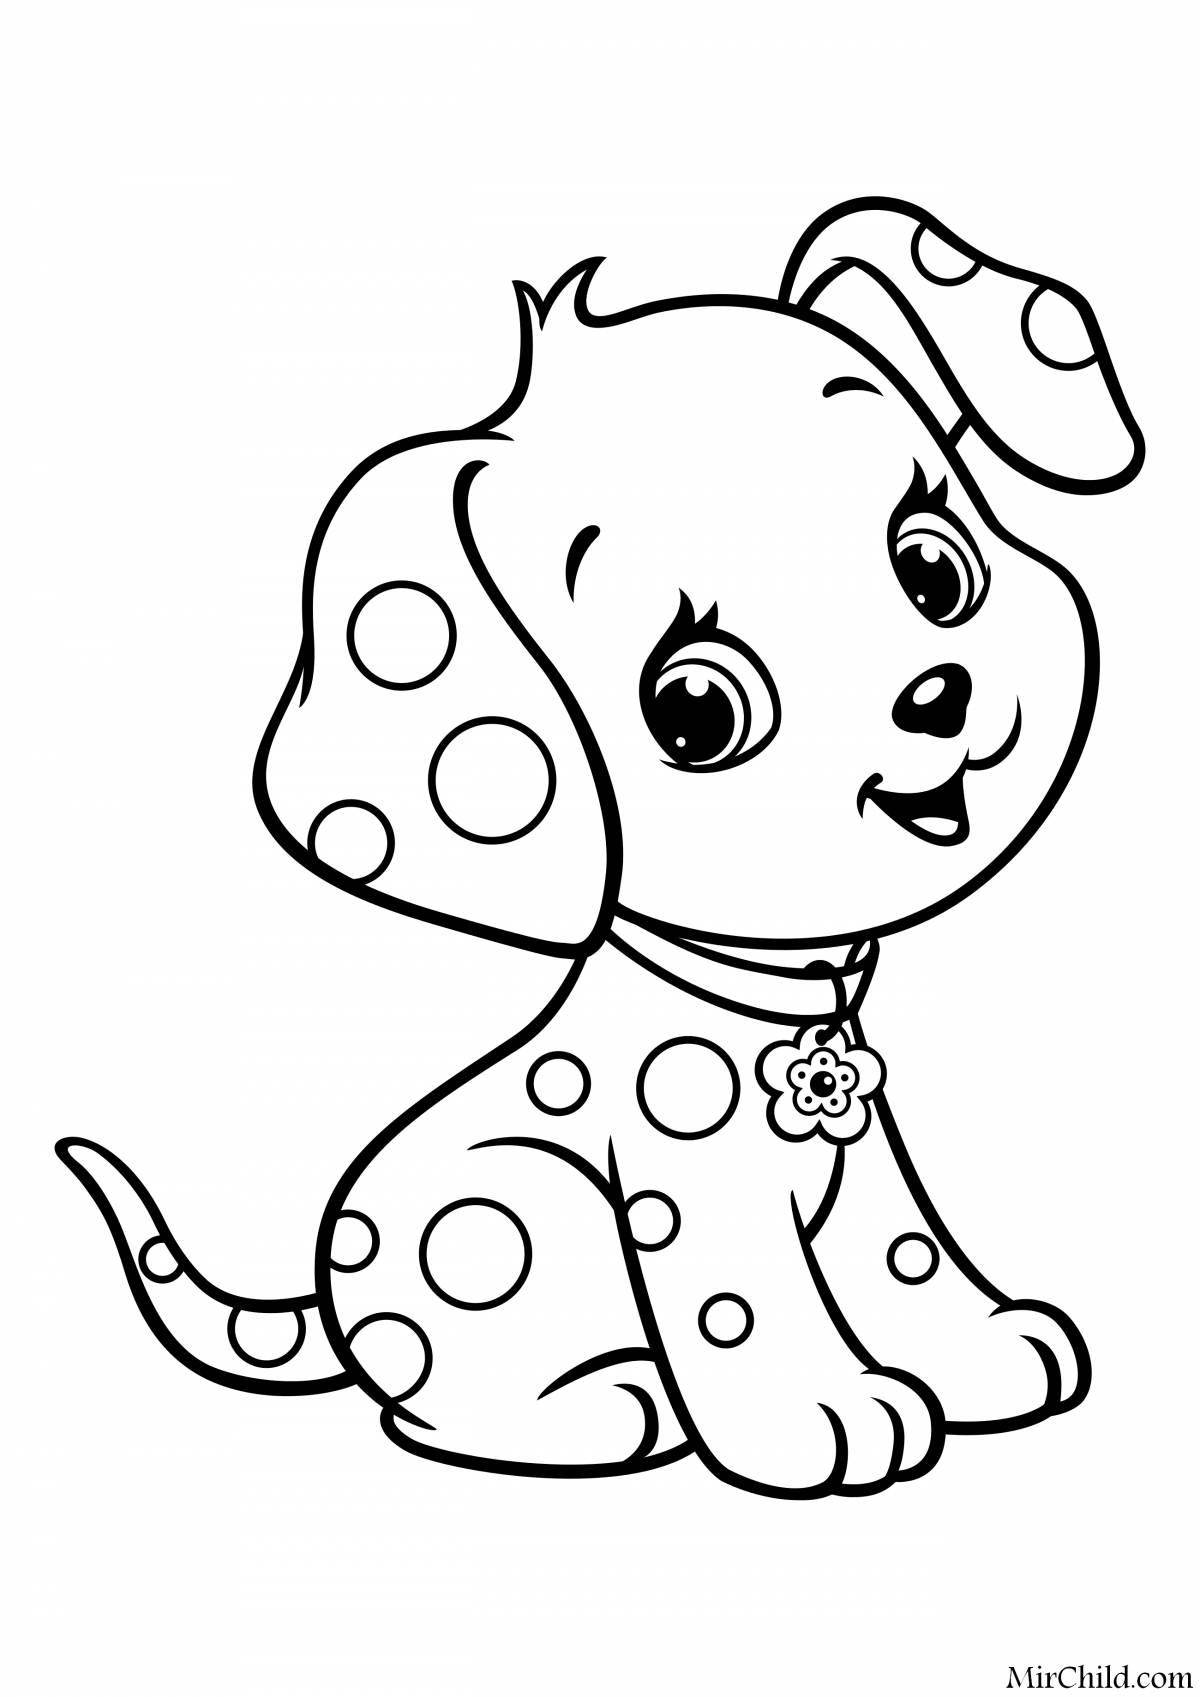 Coloring book smiling cute dog